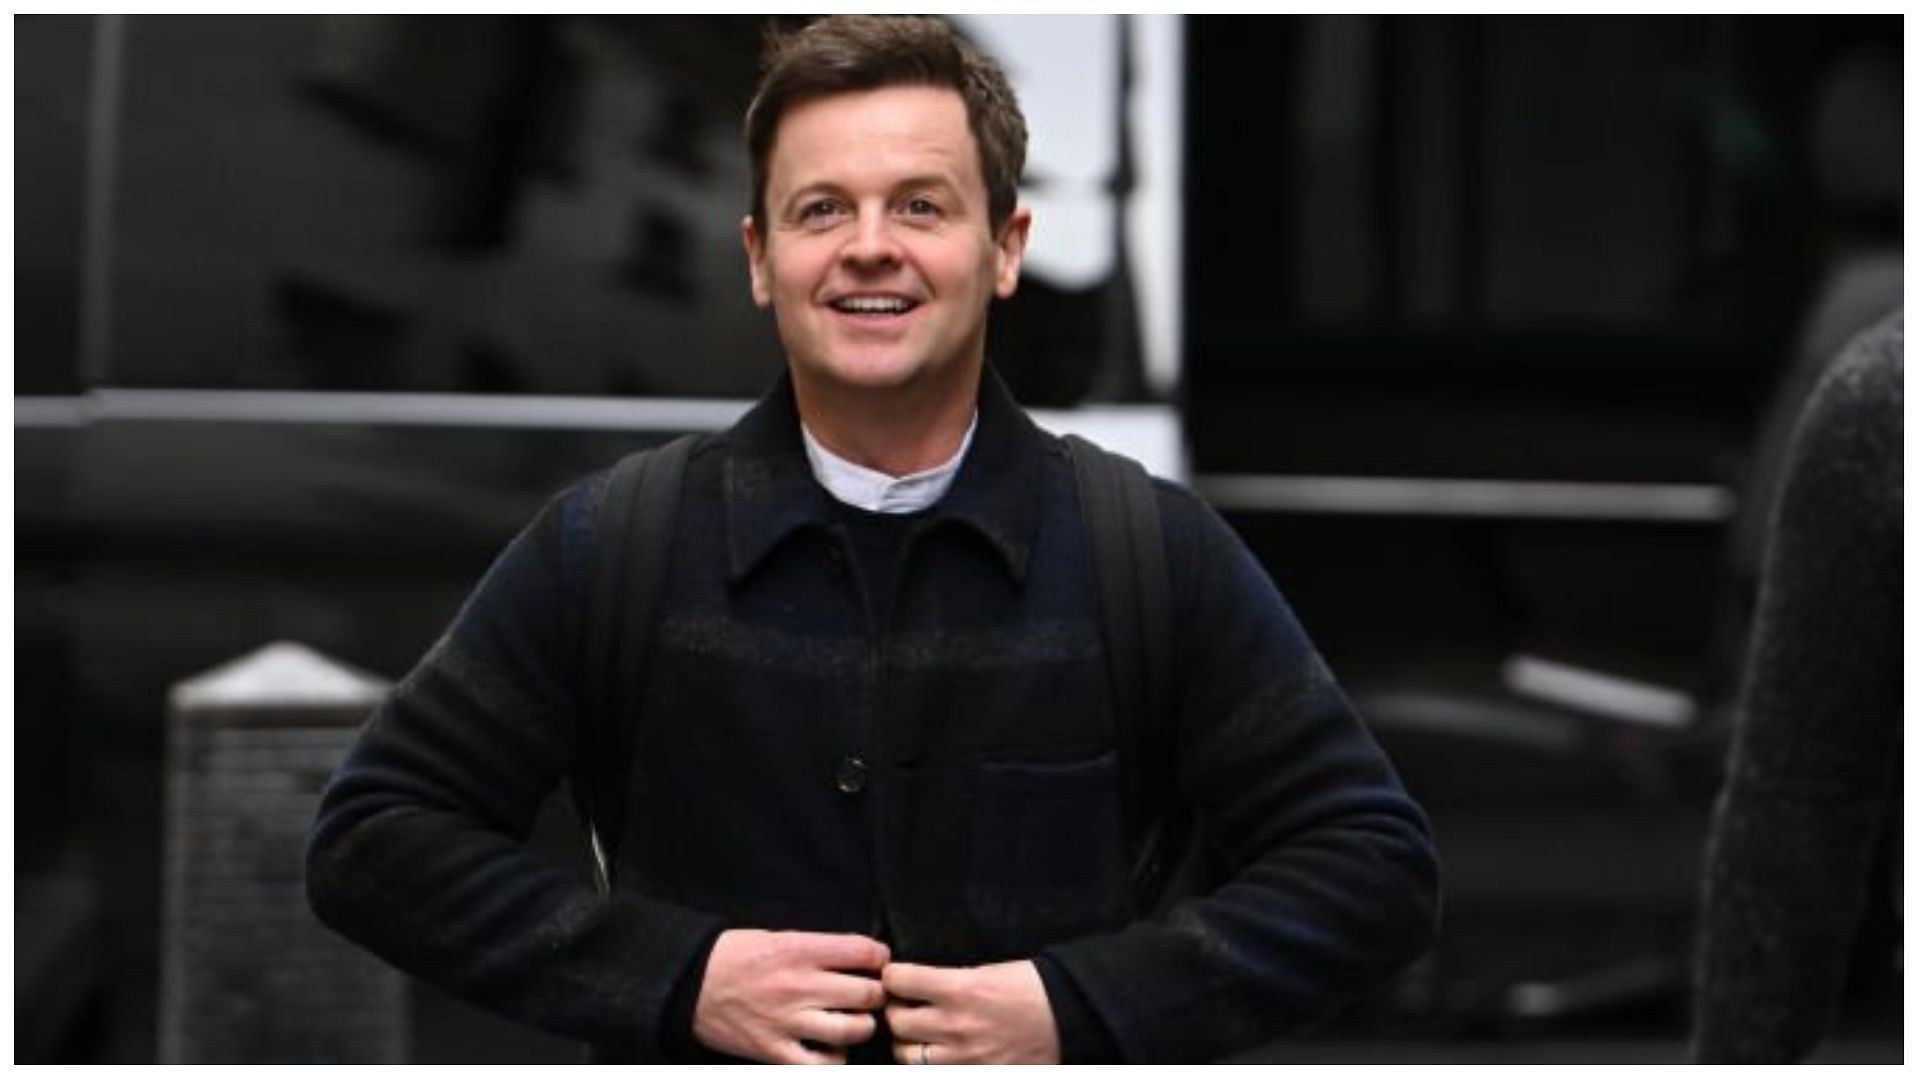 Declan Donnelly recently expressed grief over the death of his brother (Image via Neil Mockford/Getty Images)